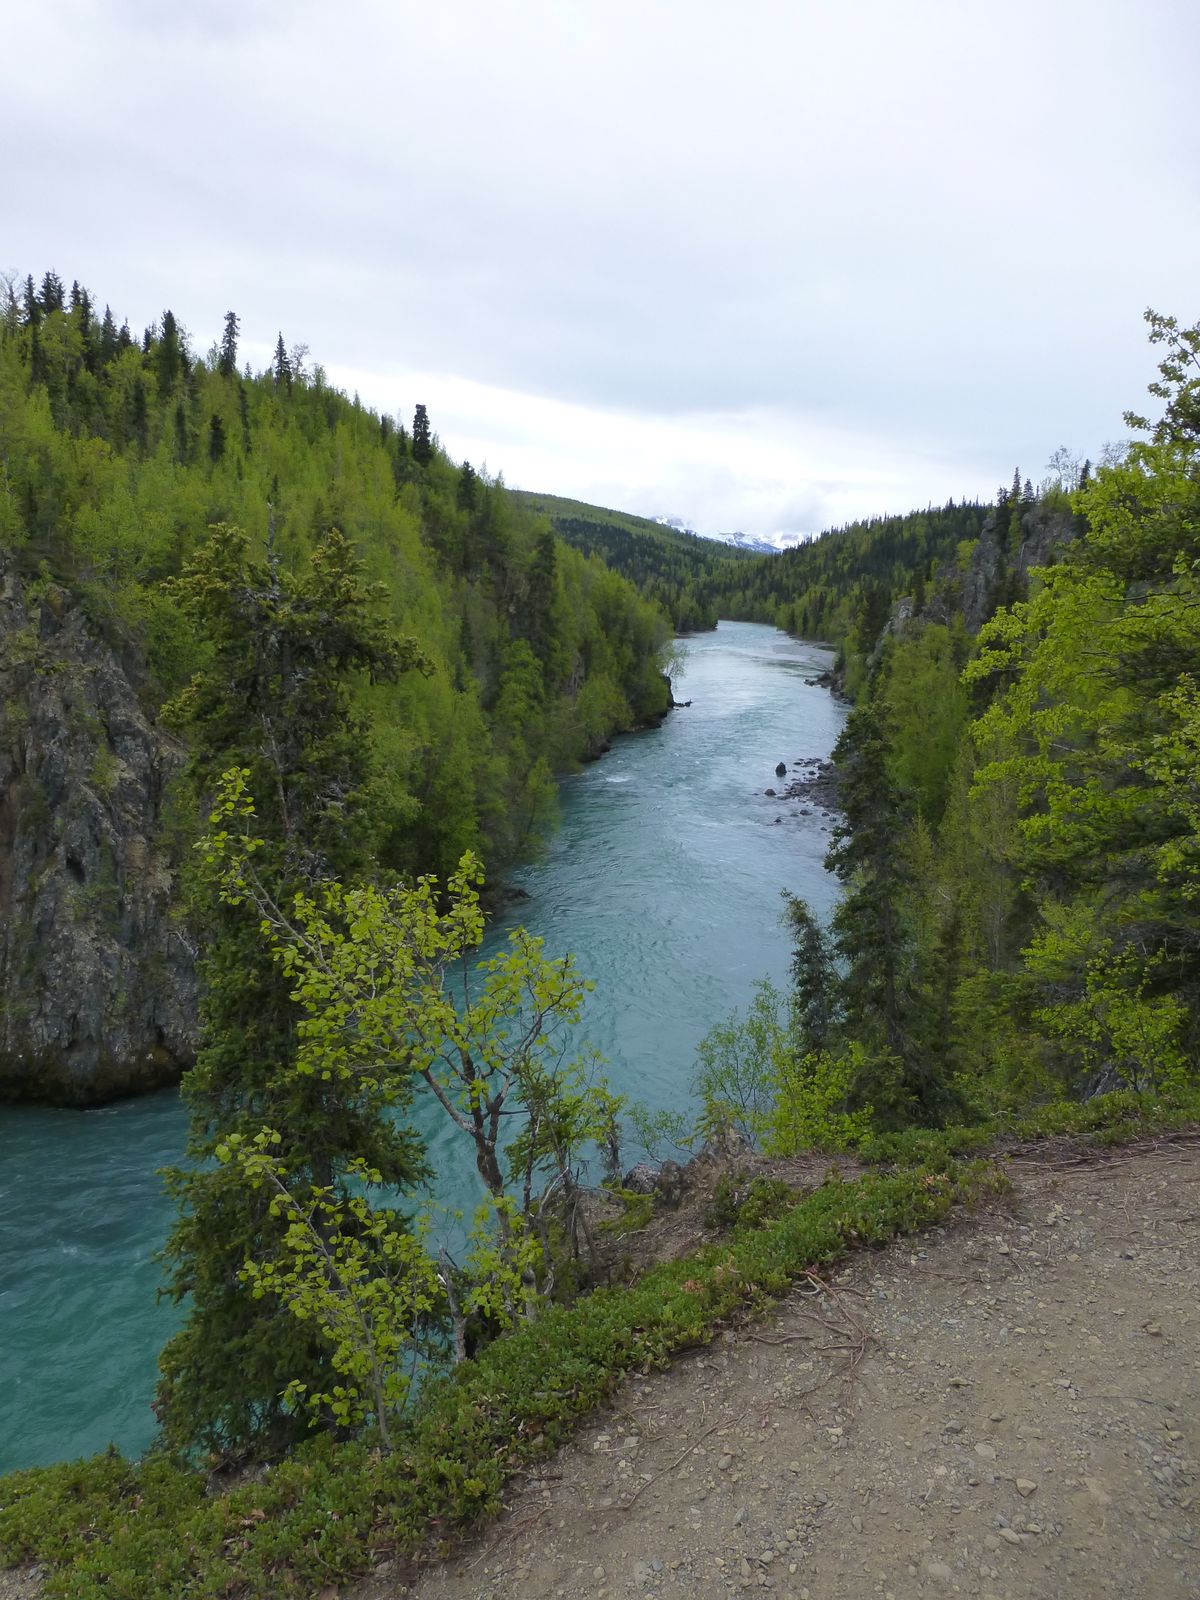 Easy hike offers gorgeous Kenai River views - Anchorage Daily News